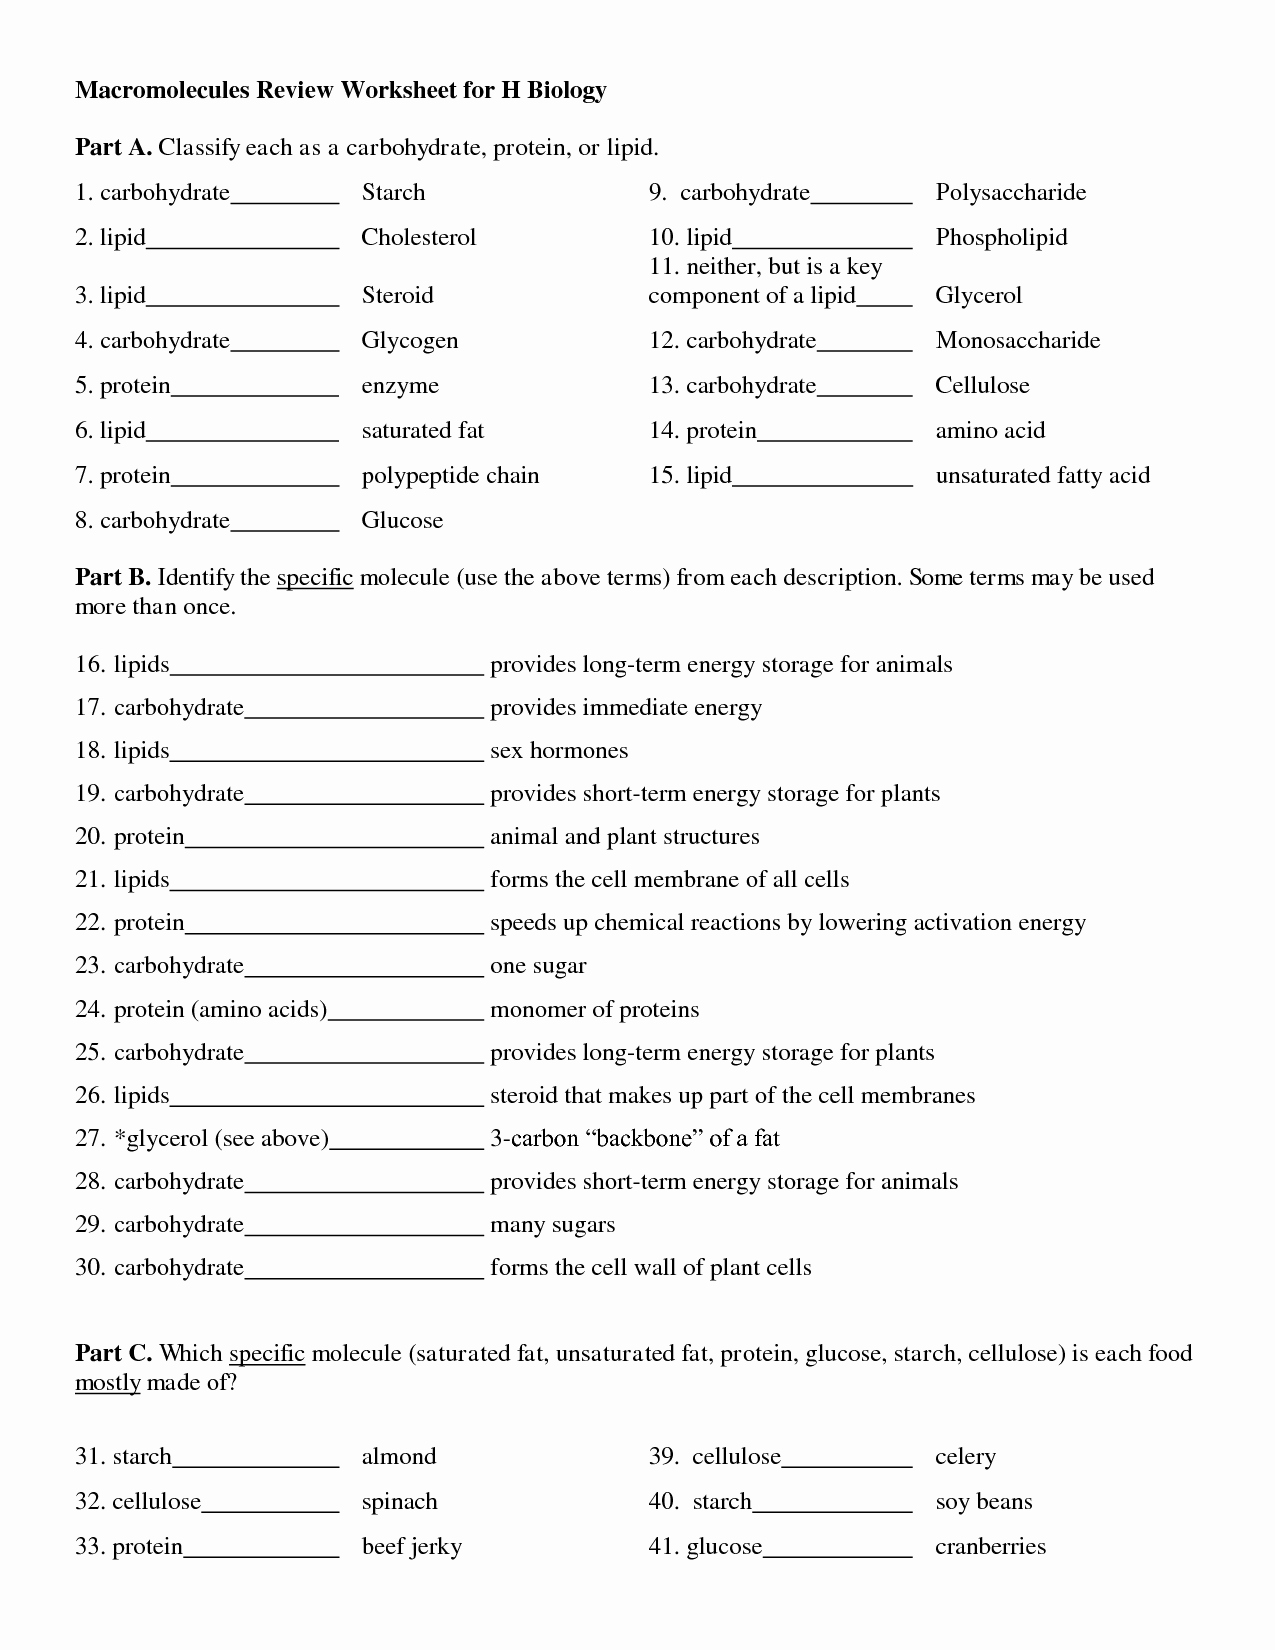 Biological Molecules Worksheet Answers Awesome Biological Molecules Worksheet Answers